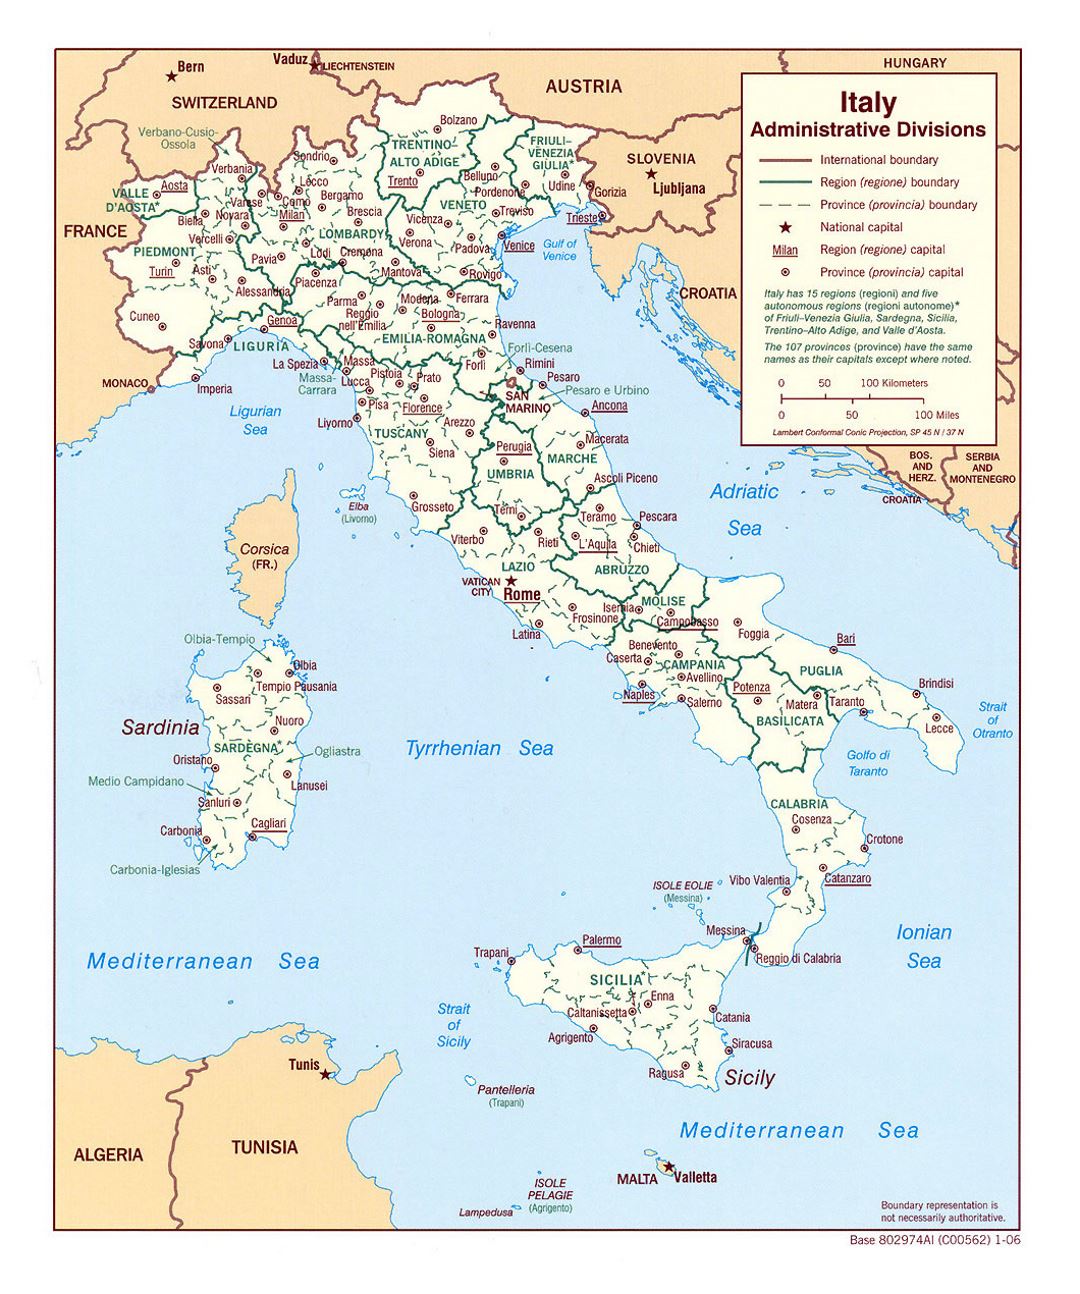 Detailed administrative divisions map of Italy - 2006